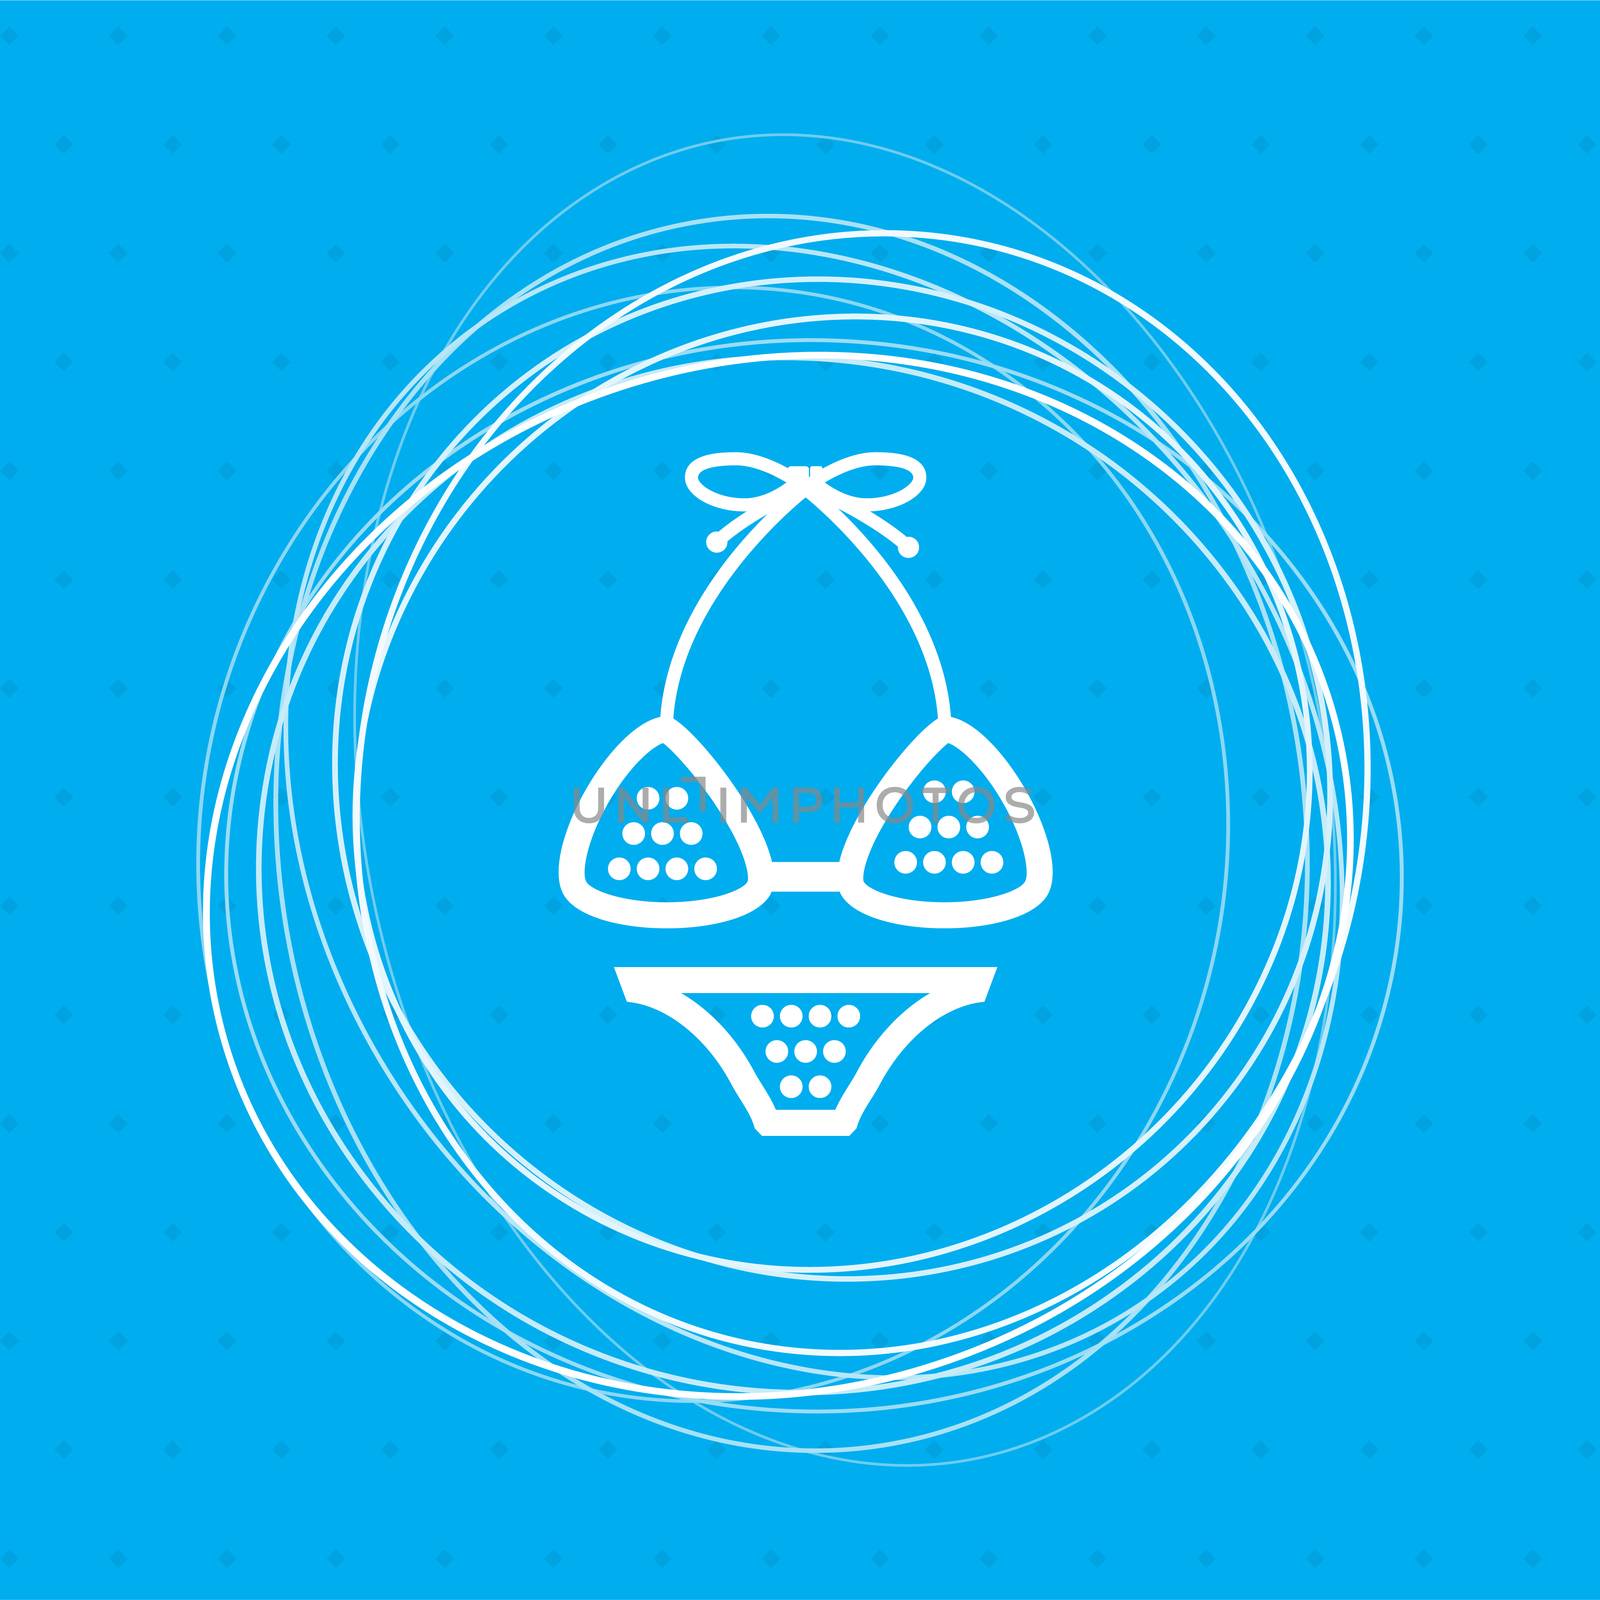 Underwear, bikini icon on a blue background with abstract circles around and place for your text. illustration